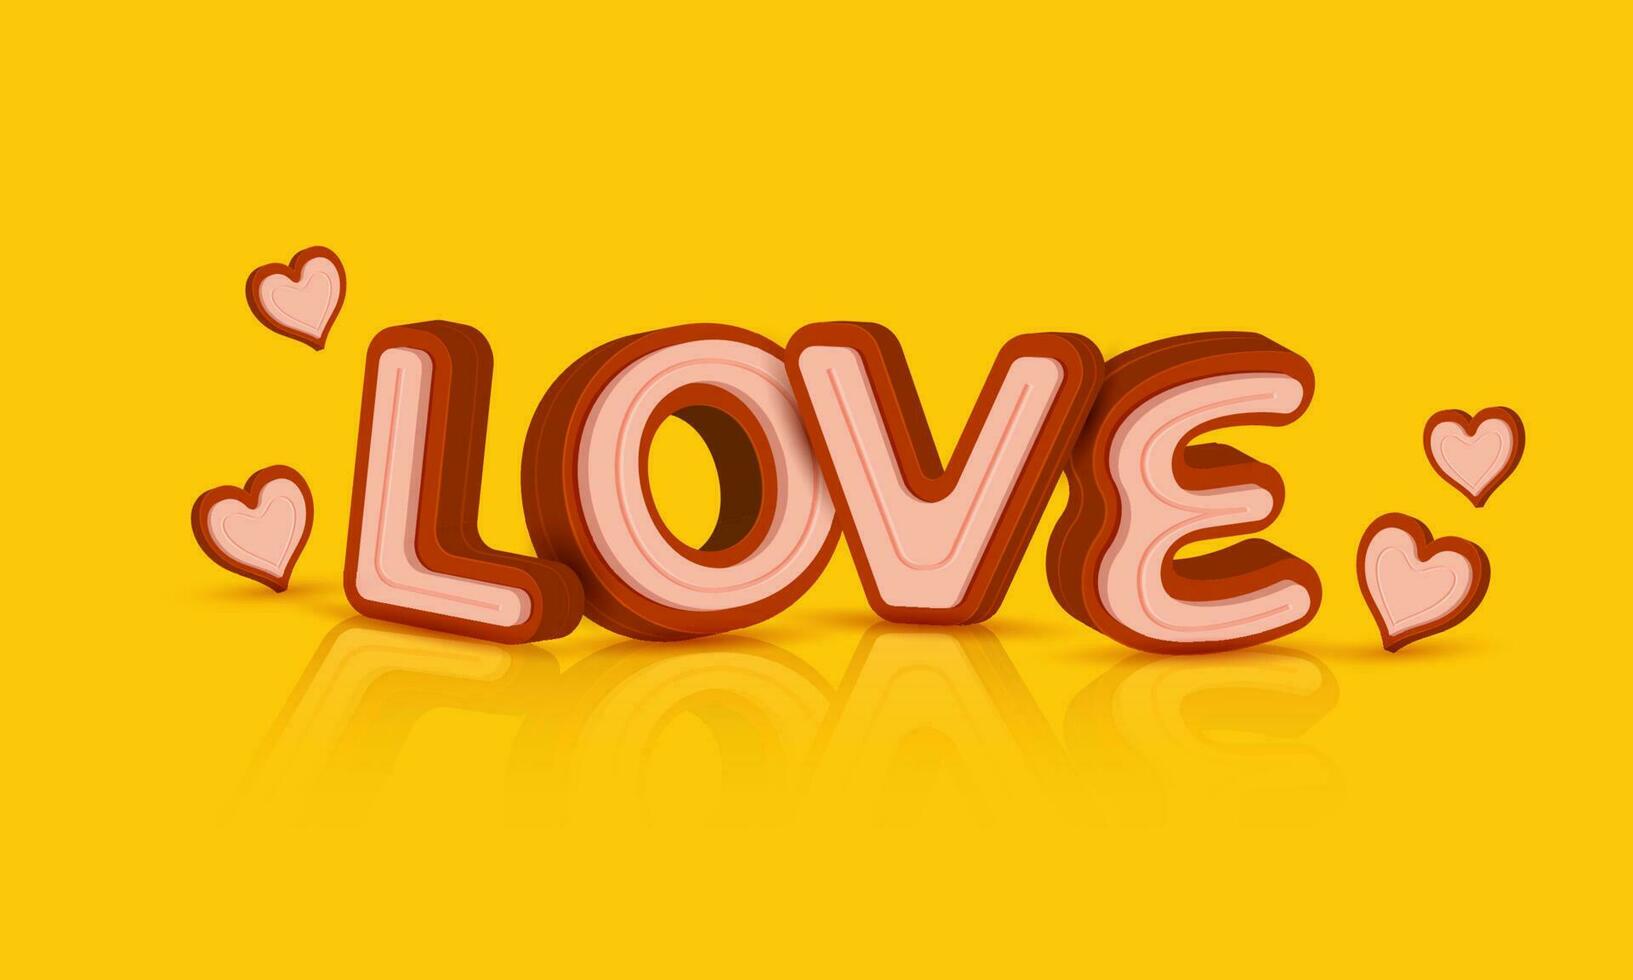 3D Love Font With Hearts Decorated On Yellow Background. vector